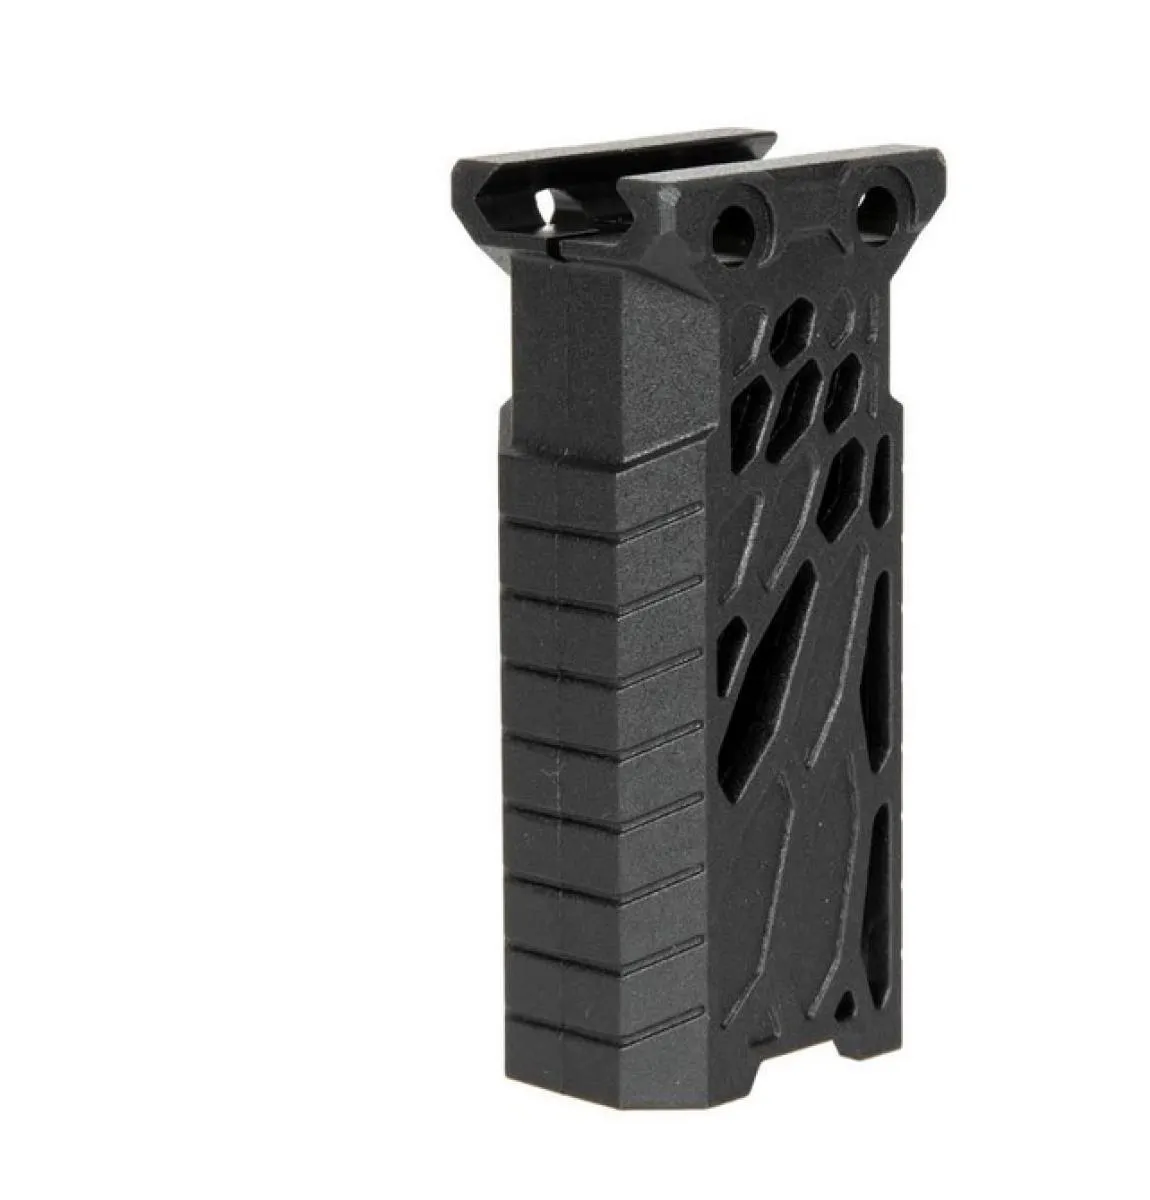 DBoys Tactical Vertical Frontgrip Polymer Black